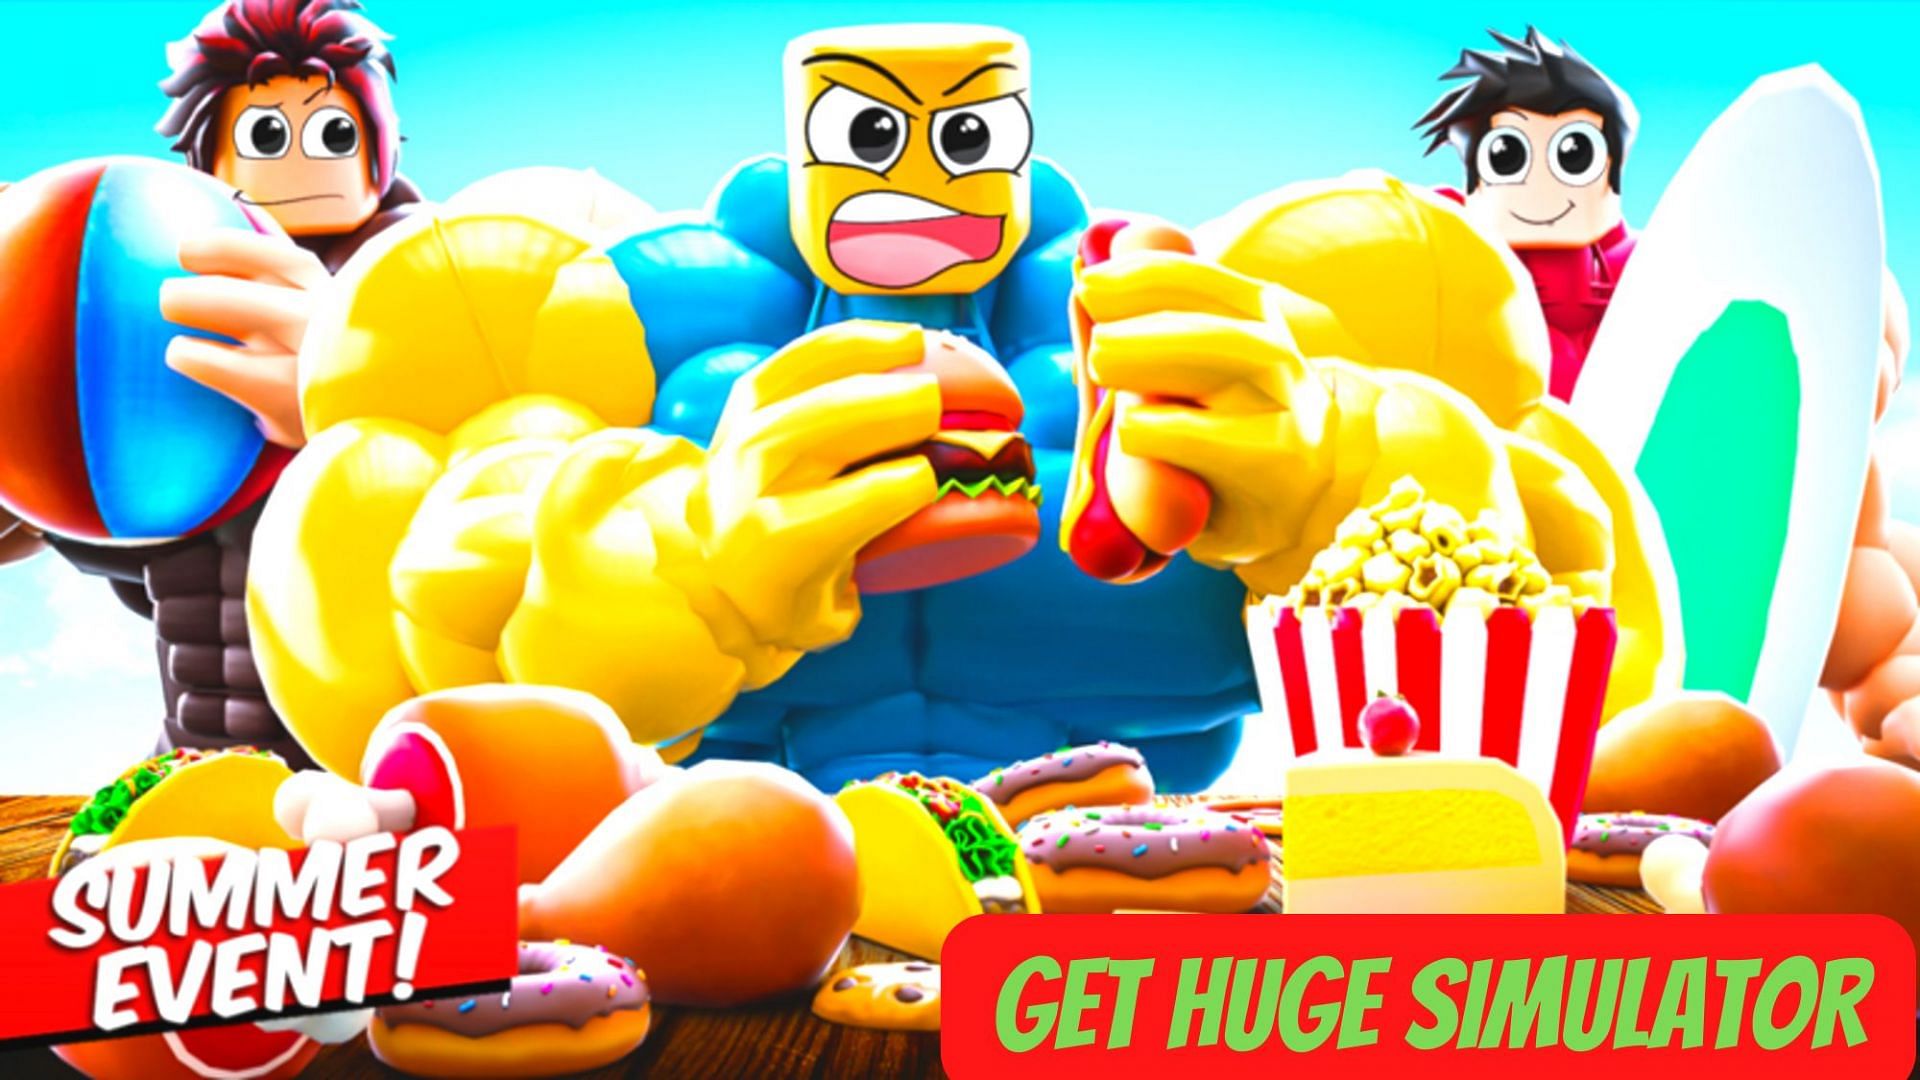 Get Huge Simulator Codes In Roblox Free Boosts Gems And More June 2022 